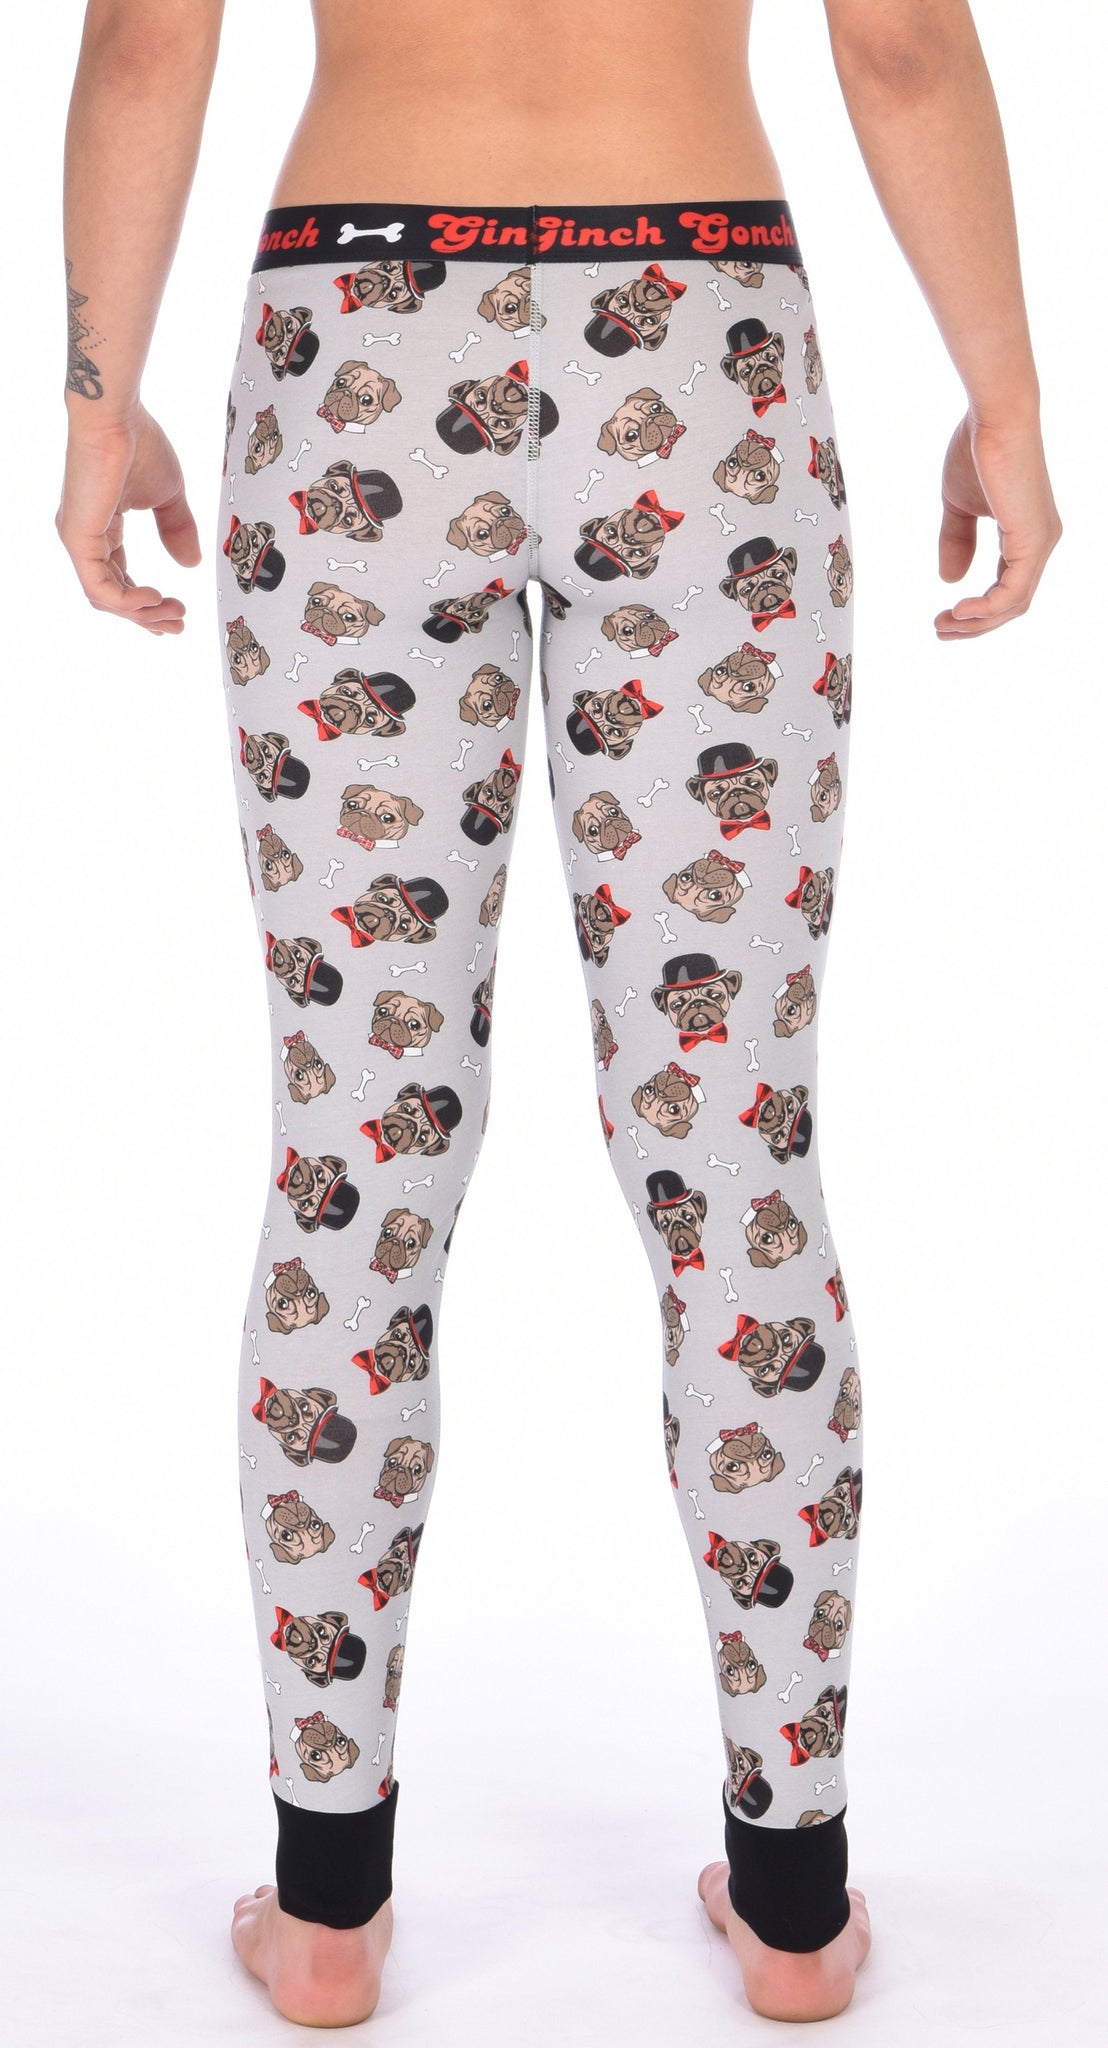 GG Ginch Gonch Pug Life leggings long johns - women's Underwear grey background with pugs with top hats and bow ties and bones. Black trim and y front with black printed waistband back